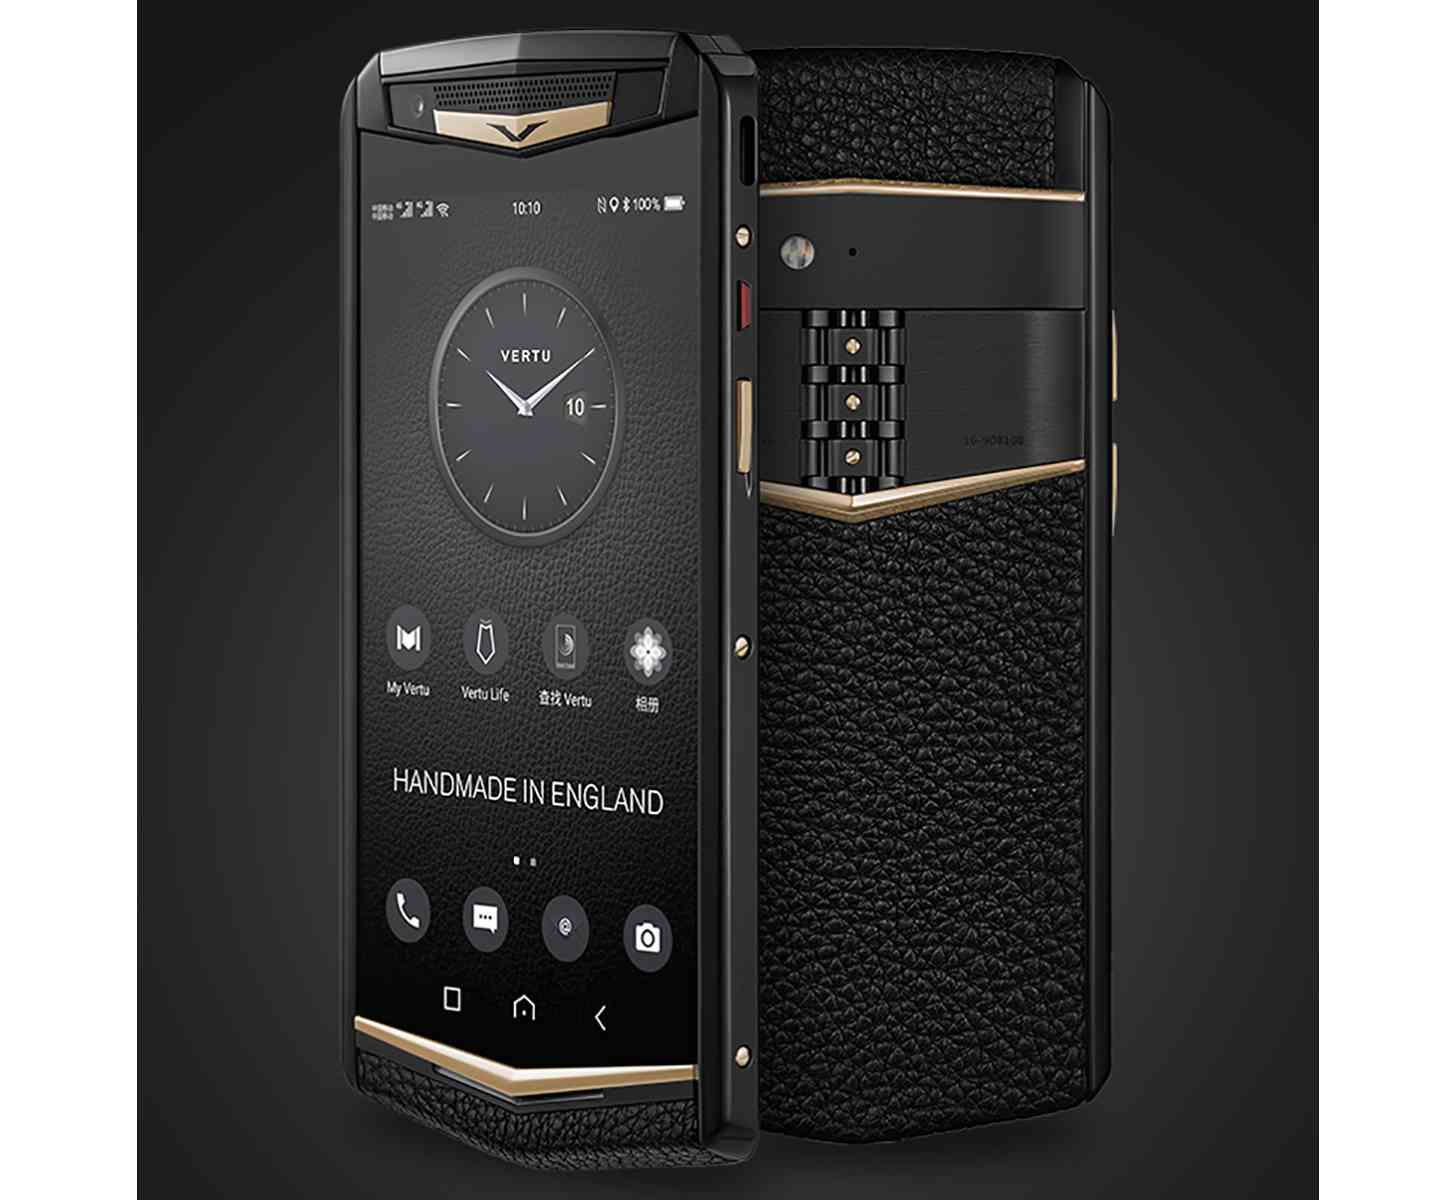 Vertu Aster P is a new luxury smartphone that starts at 4,300 News